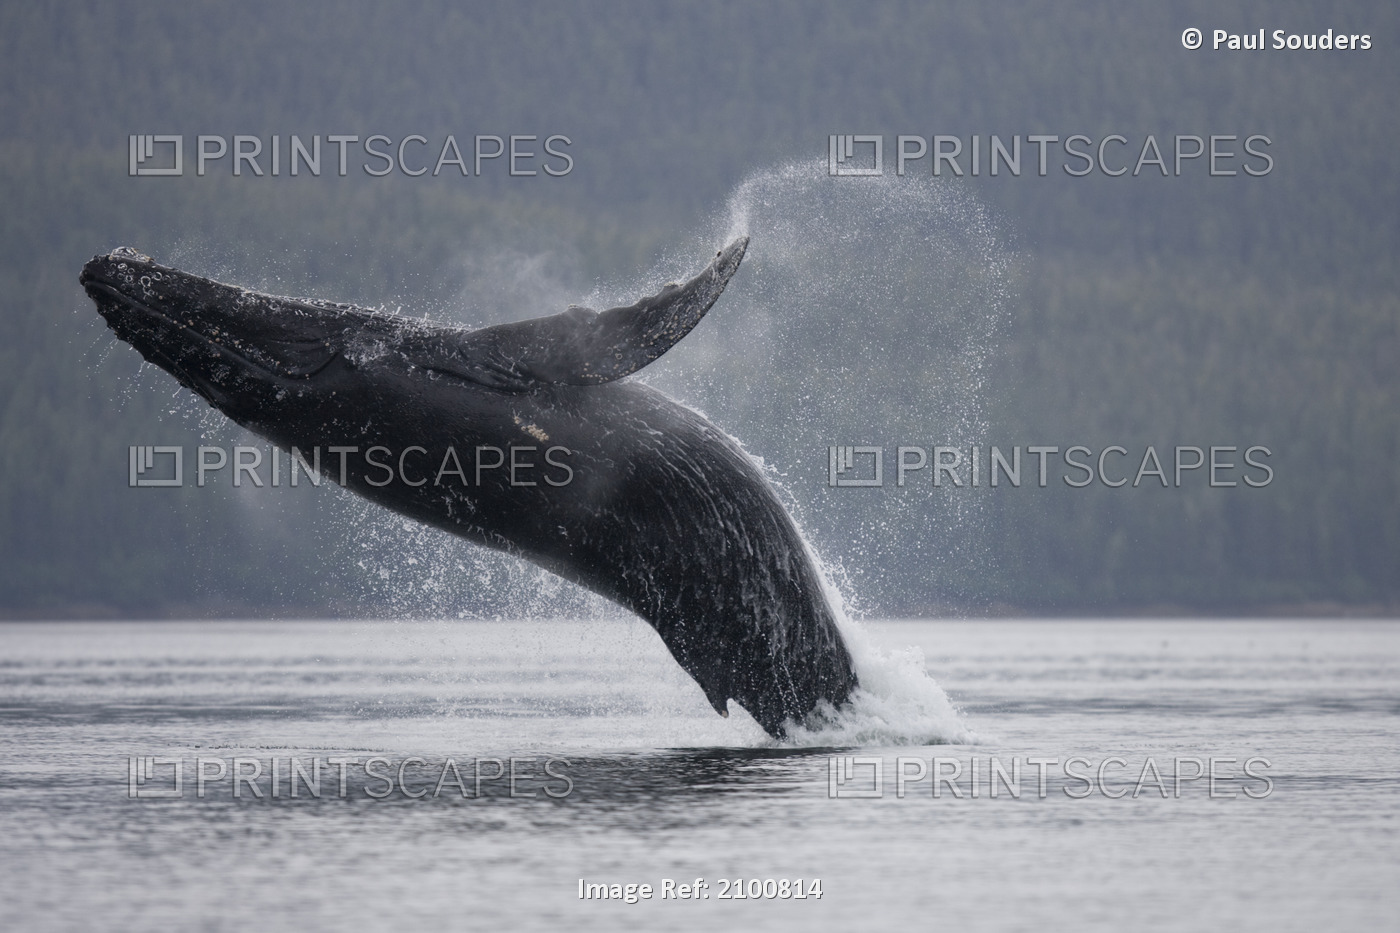 Humpback Whale Breaching In Holkham Bay, Tracy Arm-Fords Terror Wilderness, ...